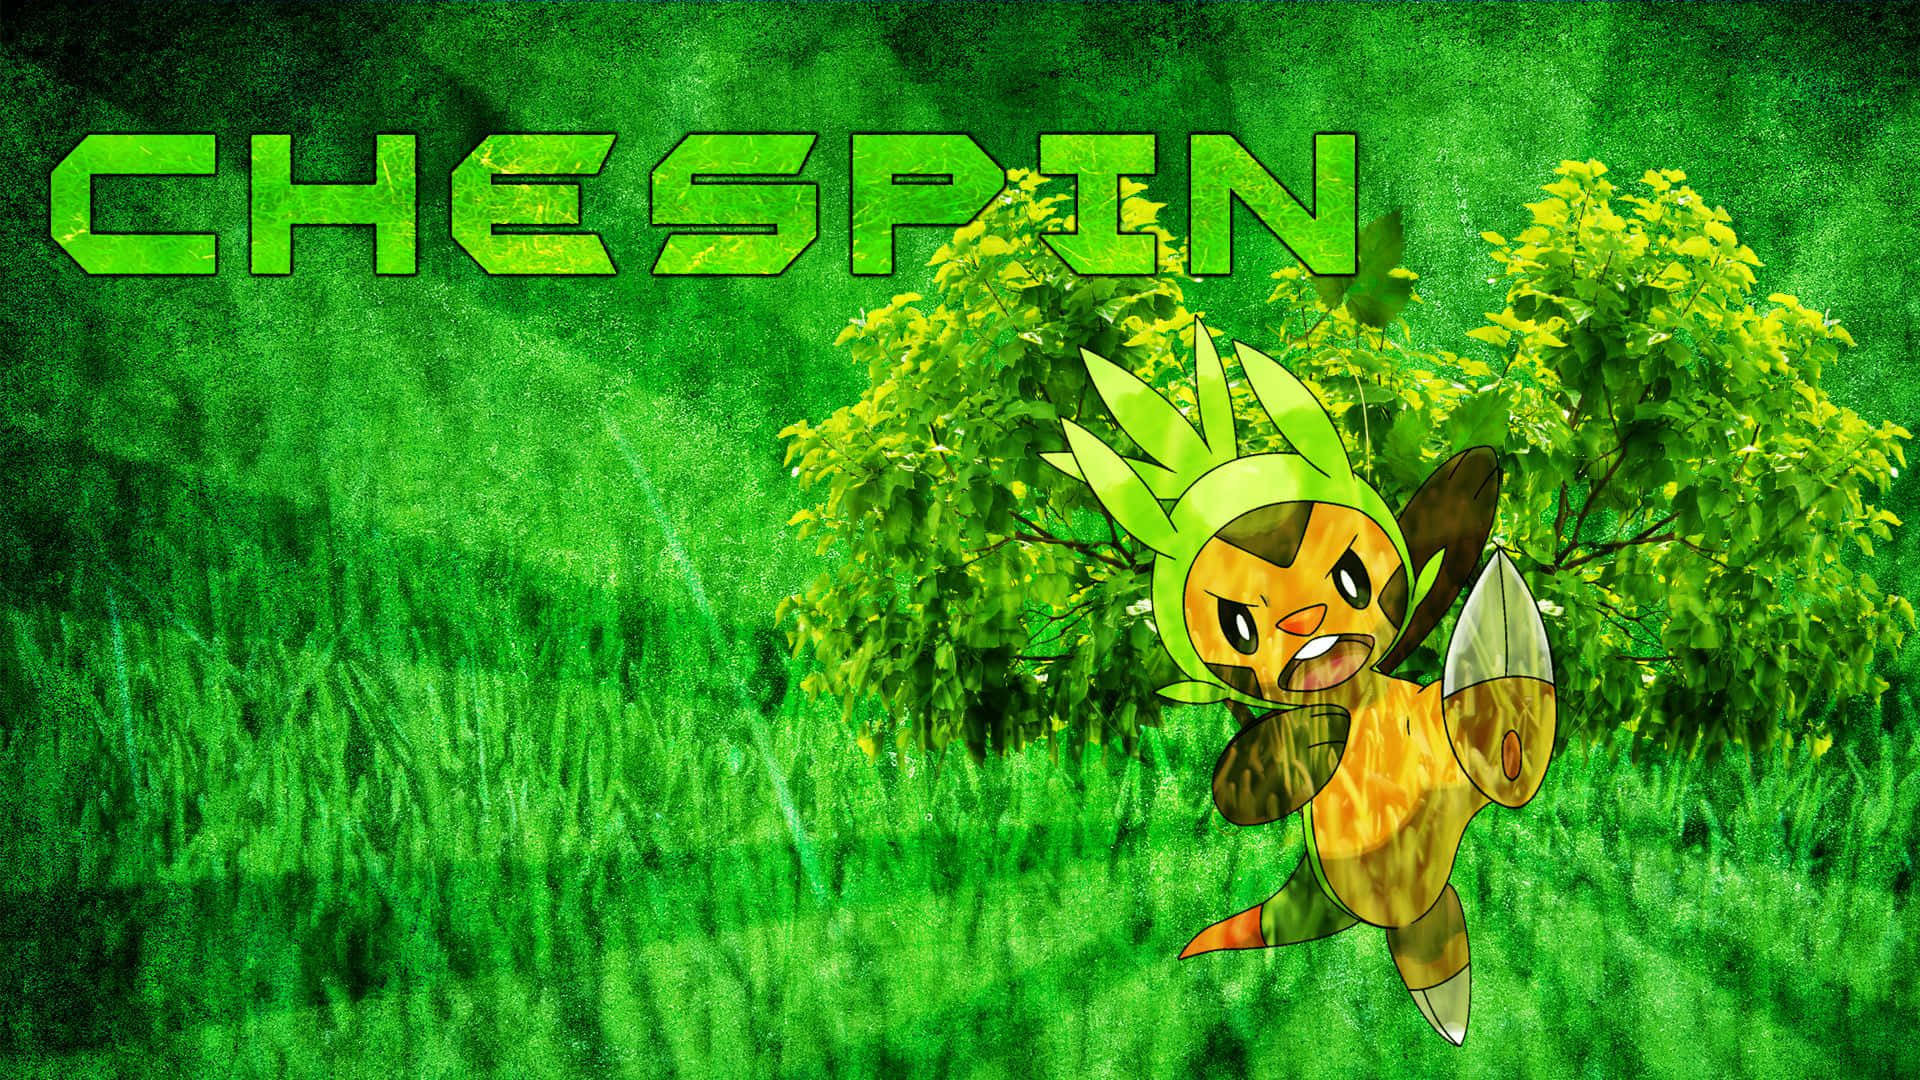 Chespin Against The Grass Wallpaper